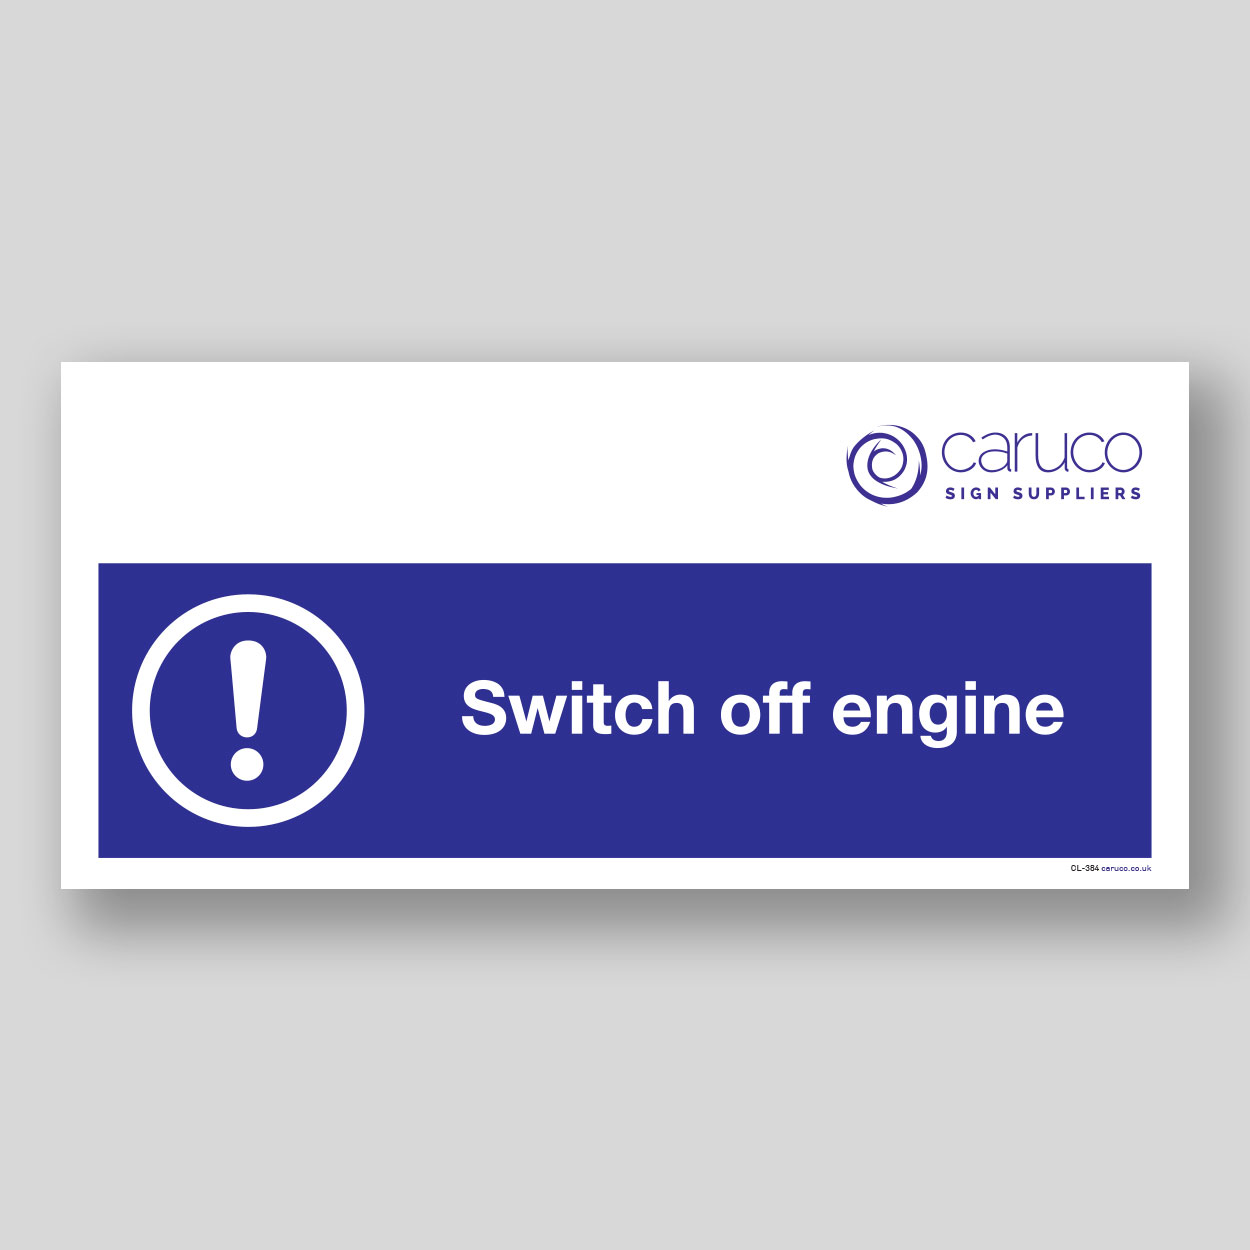 CL-384 Switch off engine